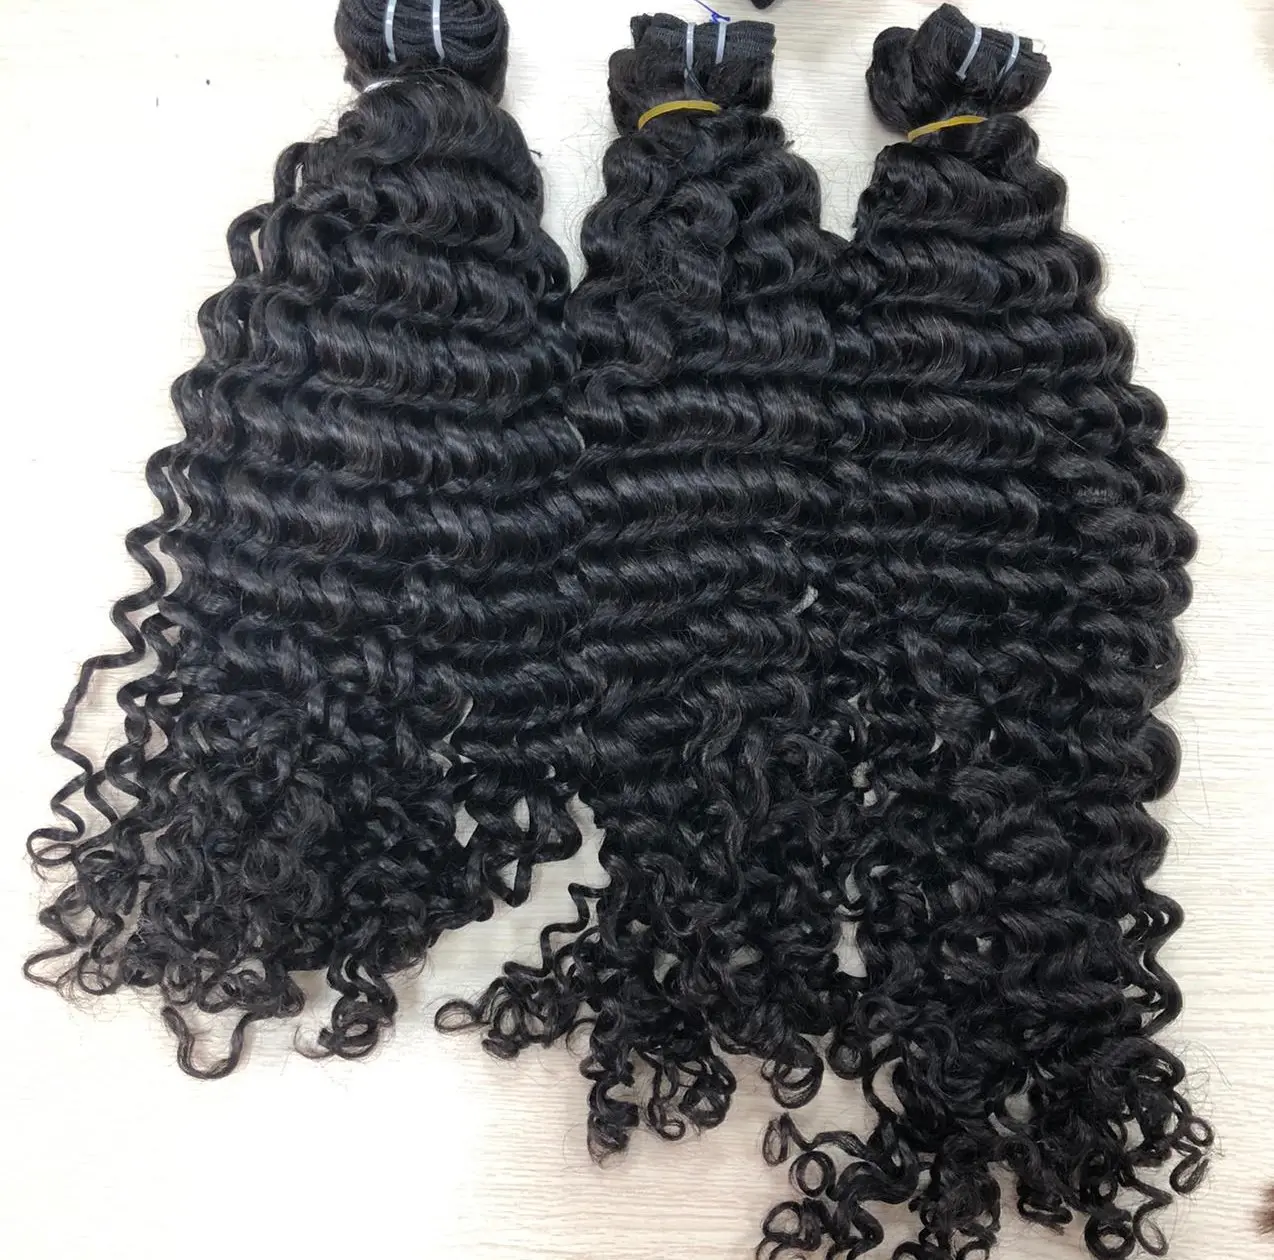 Deep wavy Weave 100% Human Hair Extension with high quality No Tangle No Shedding from Amber Luxshine Hair